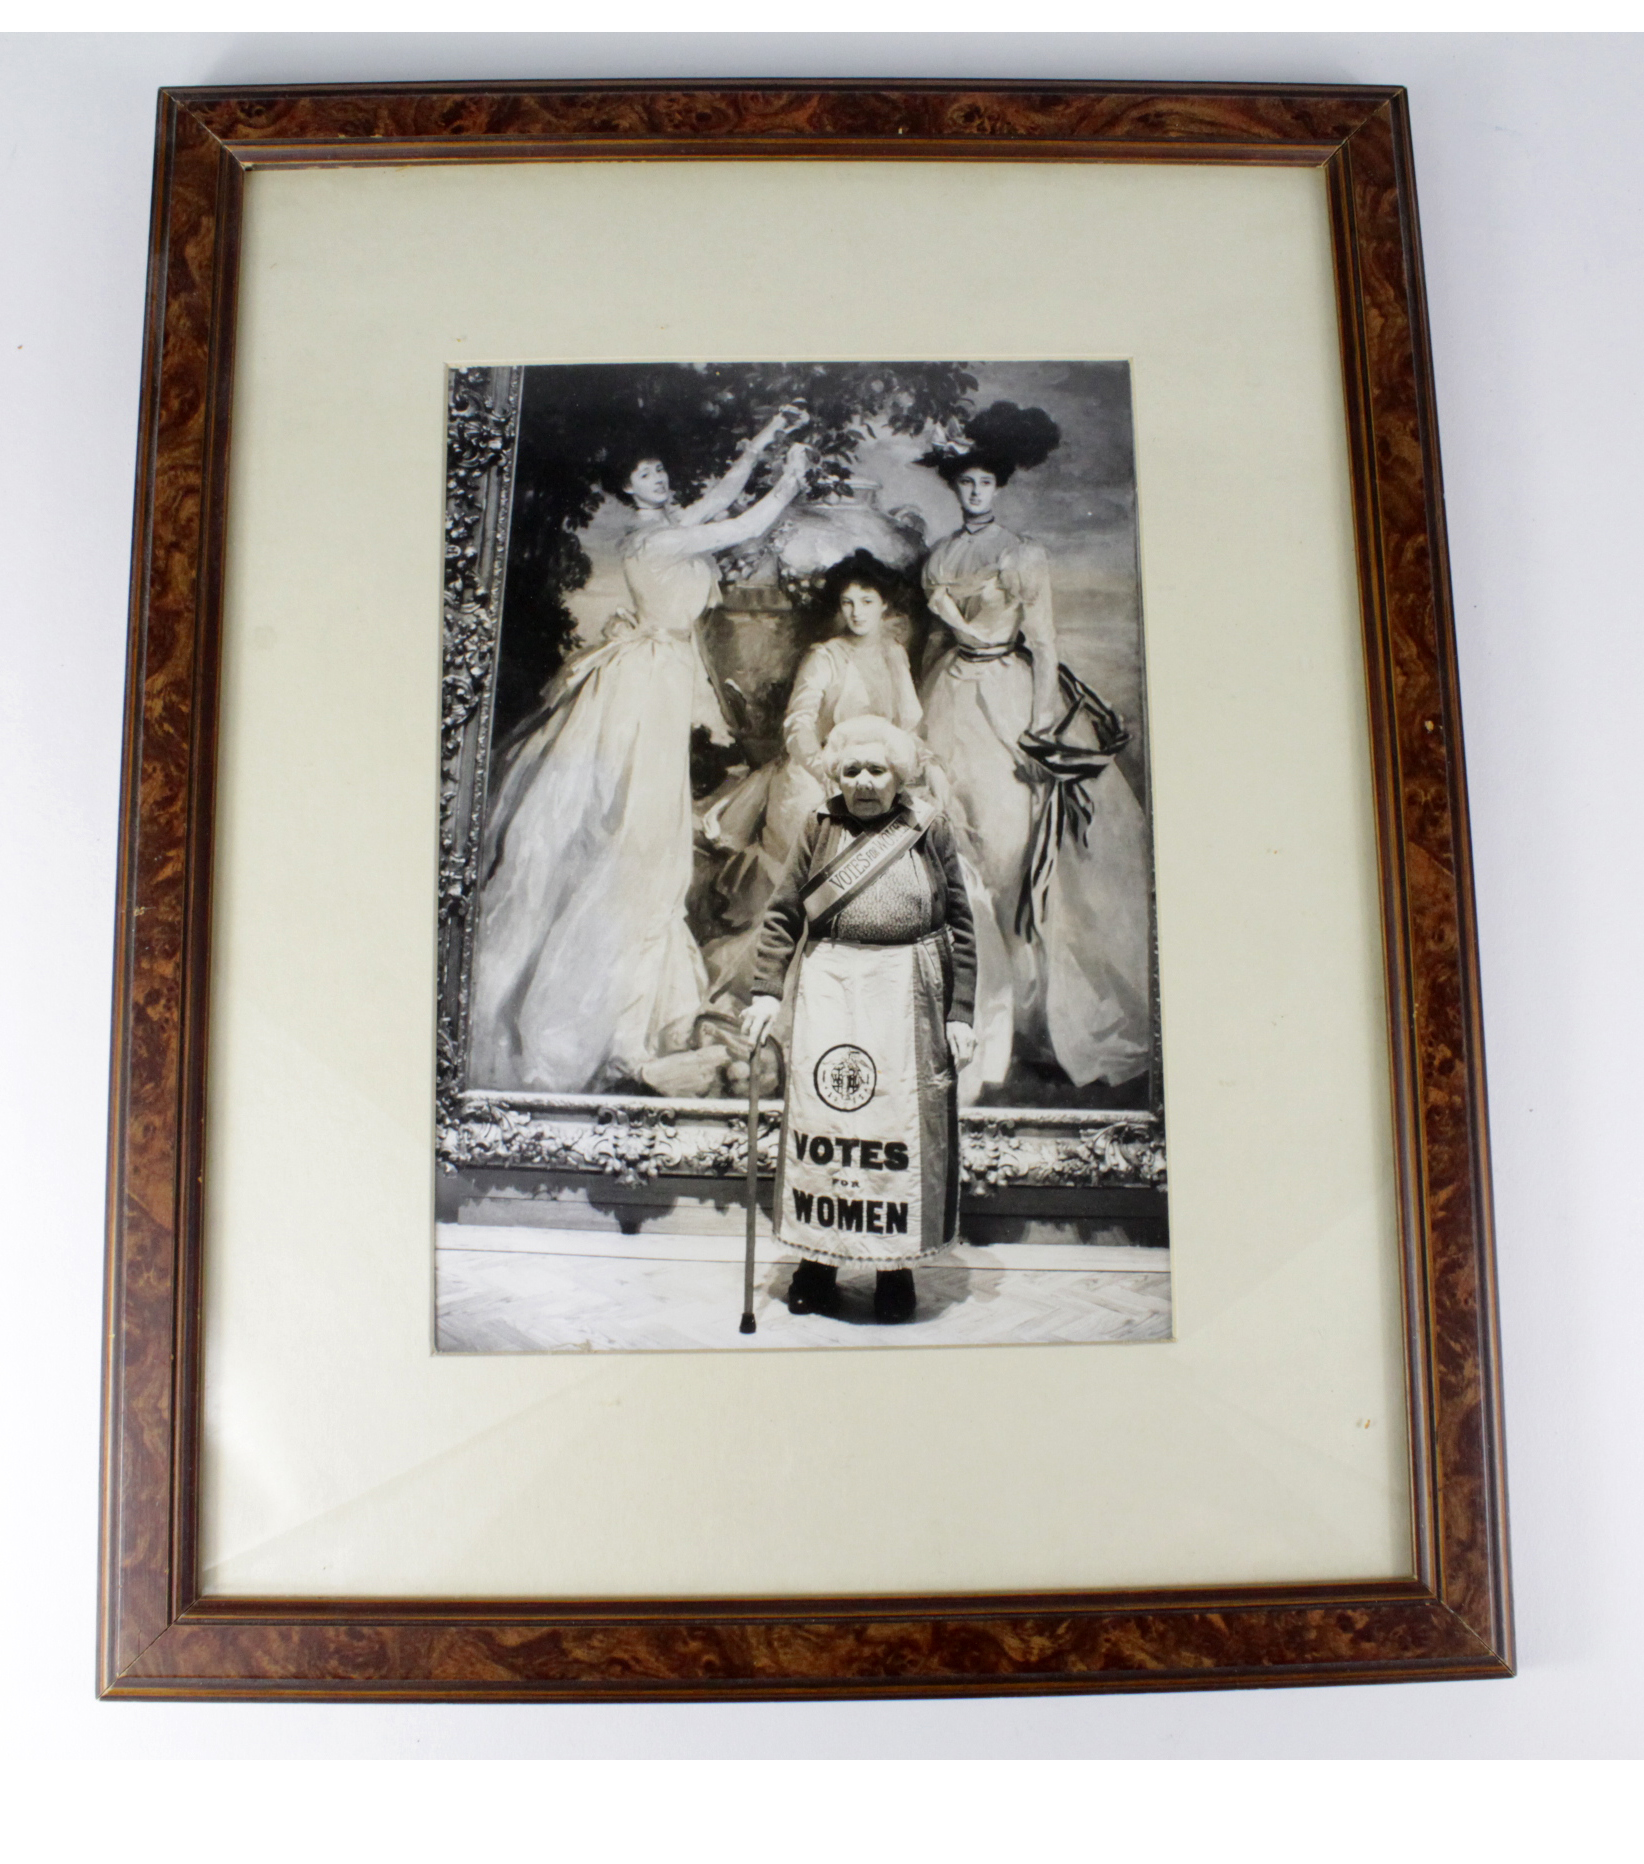 Suffragette framed photograph (looks original) of Catherine Griffiths aged 102 thought to be the